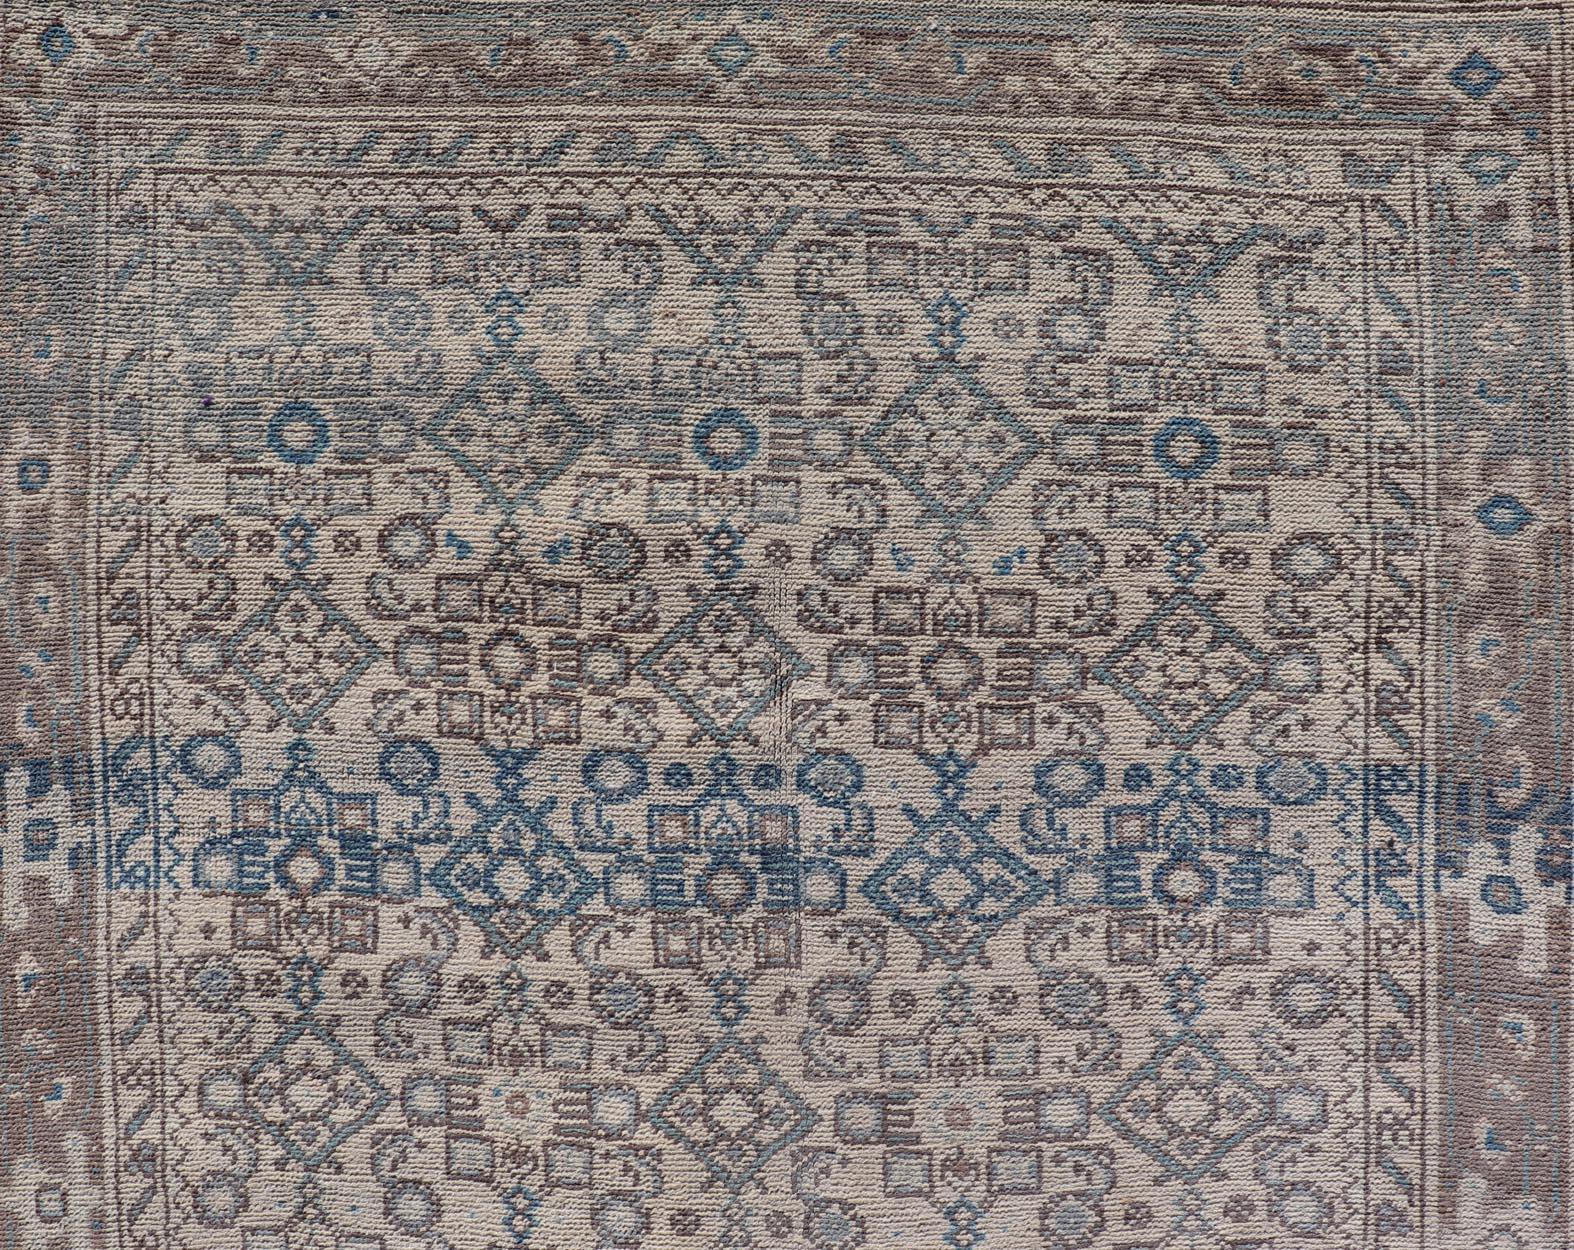 Vintage Persian Hamadan Runner in Cool Tones of Light Blue, Ivory, and L. Brown In Good Condition For Sale In Atlanta, GA